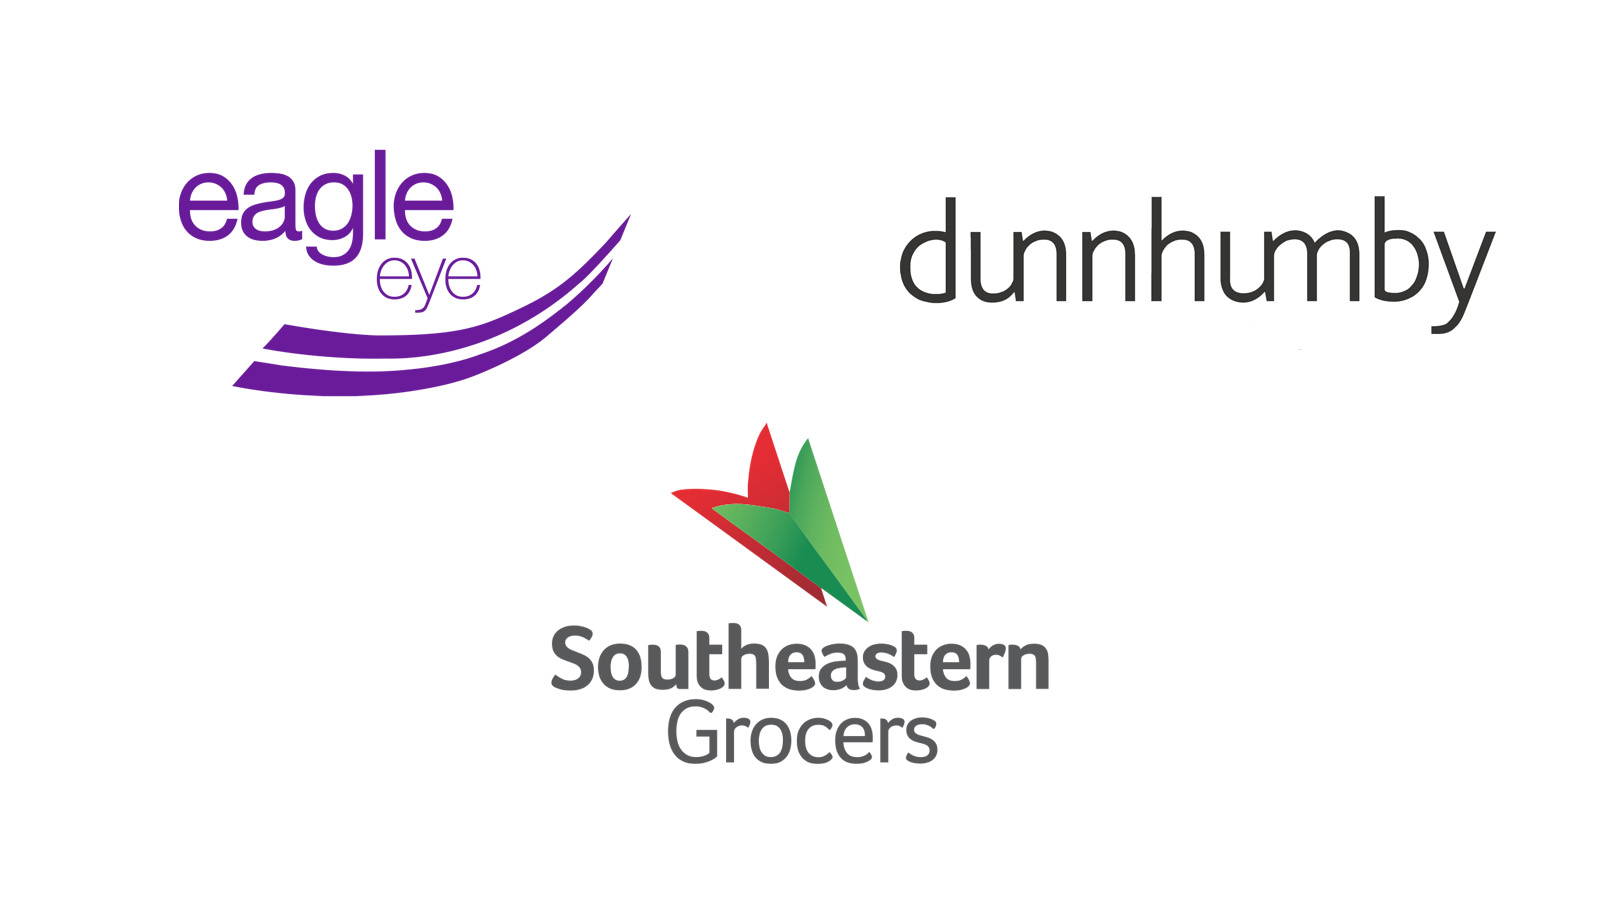 Eagle Eye and dunnhumby Deliver Personalisation at Scale for Southeastern Grocers